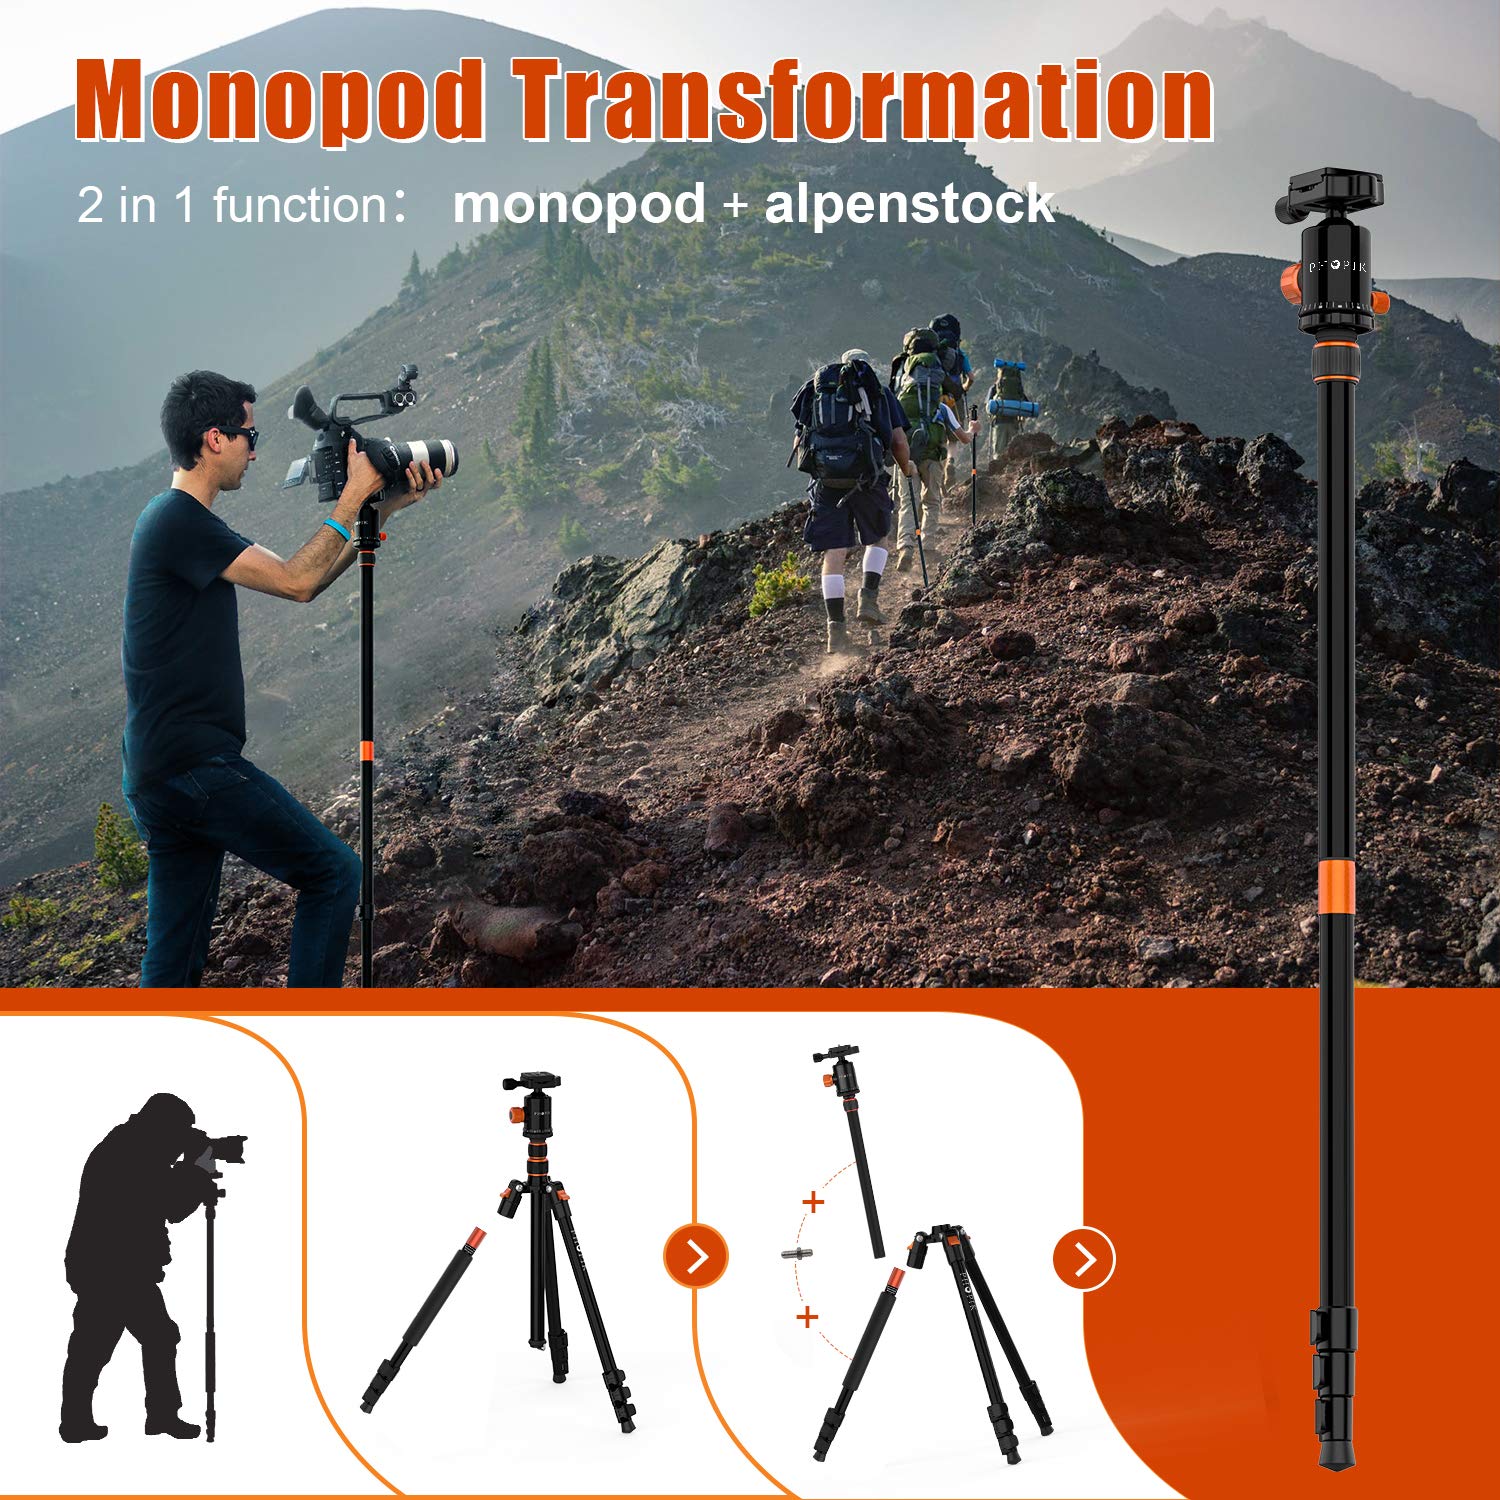 PHOPIK 77 Inches Tripod, Lightweight Aluminum Camera Tripod for DSLR, Photography Tripod with 360 Degree Ball Head 1/4" Aluminum Quick Release Plate Professional Tripod Load up to 17.6 Pounds